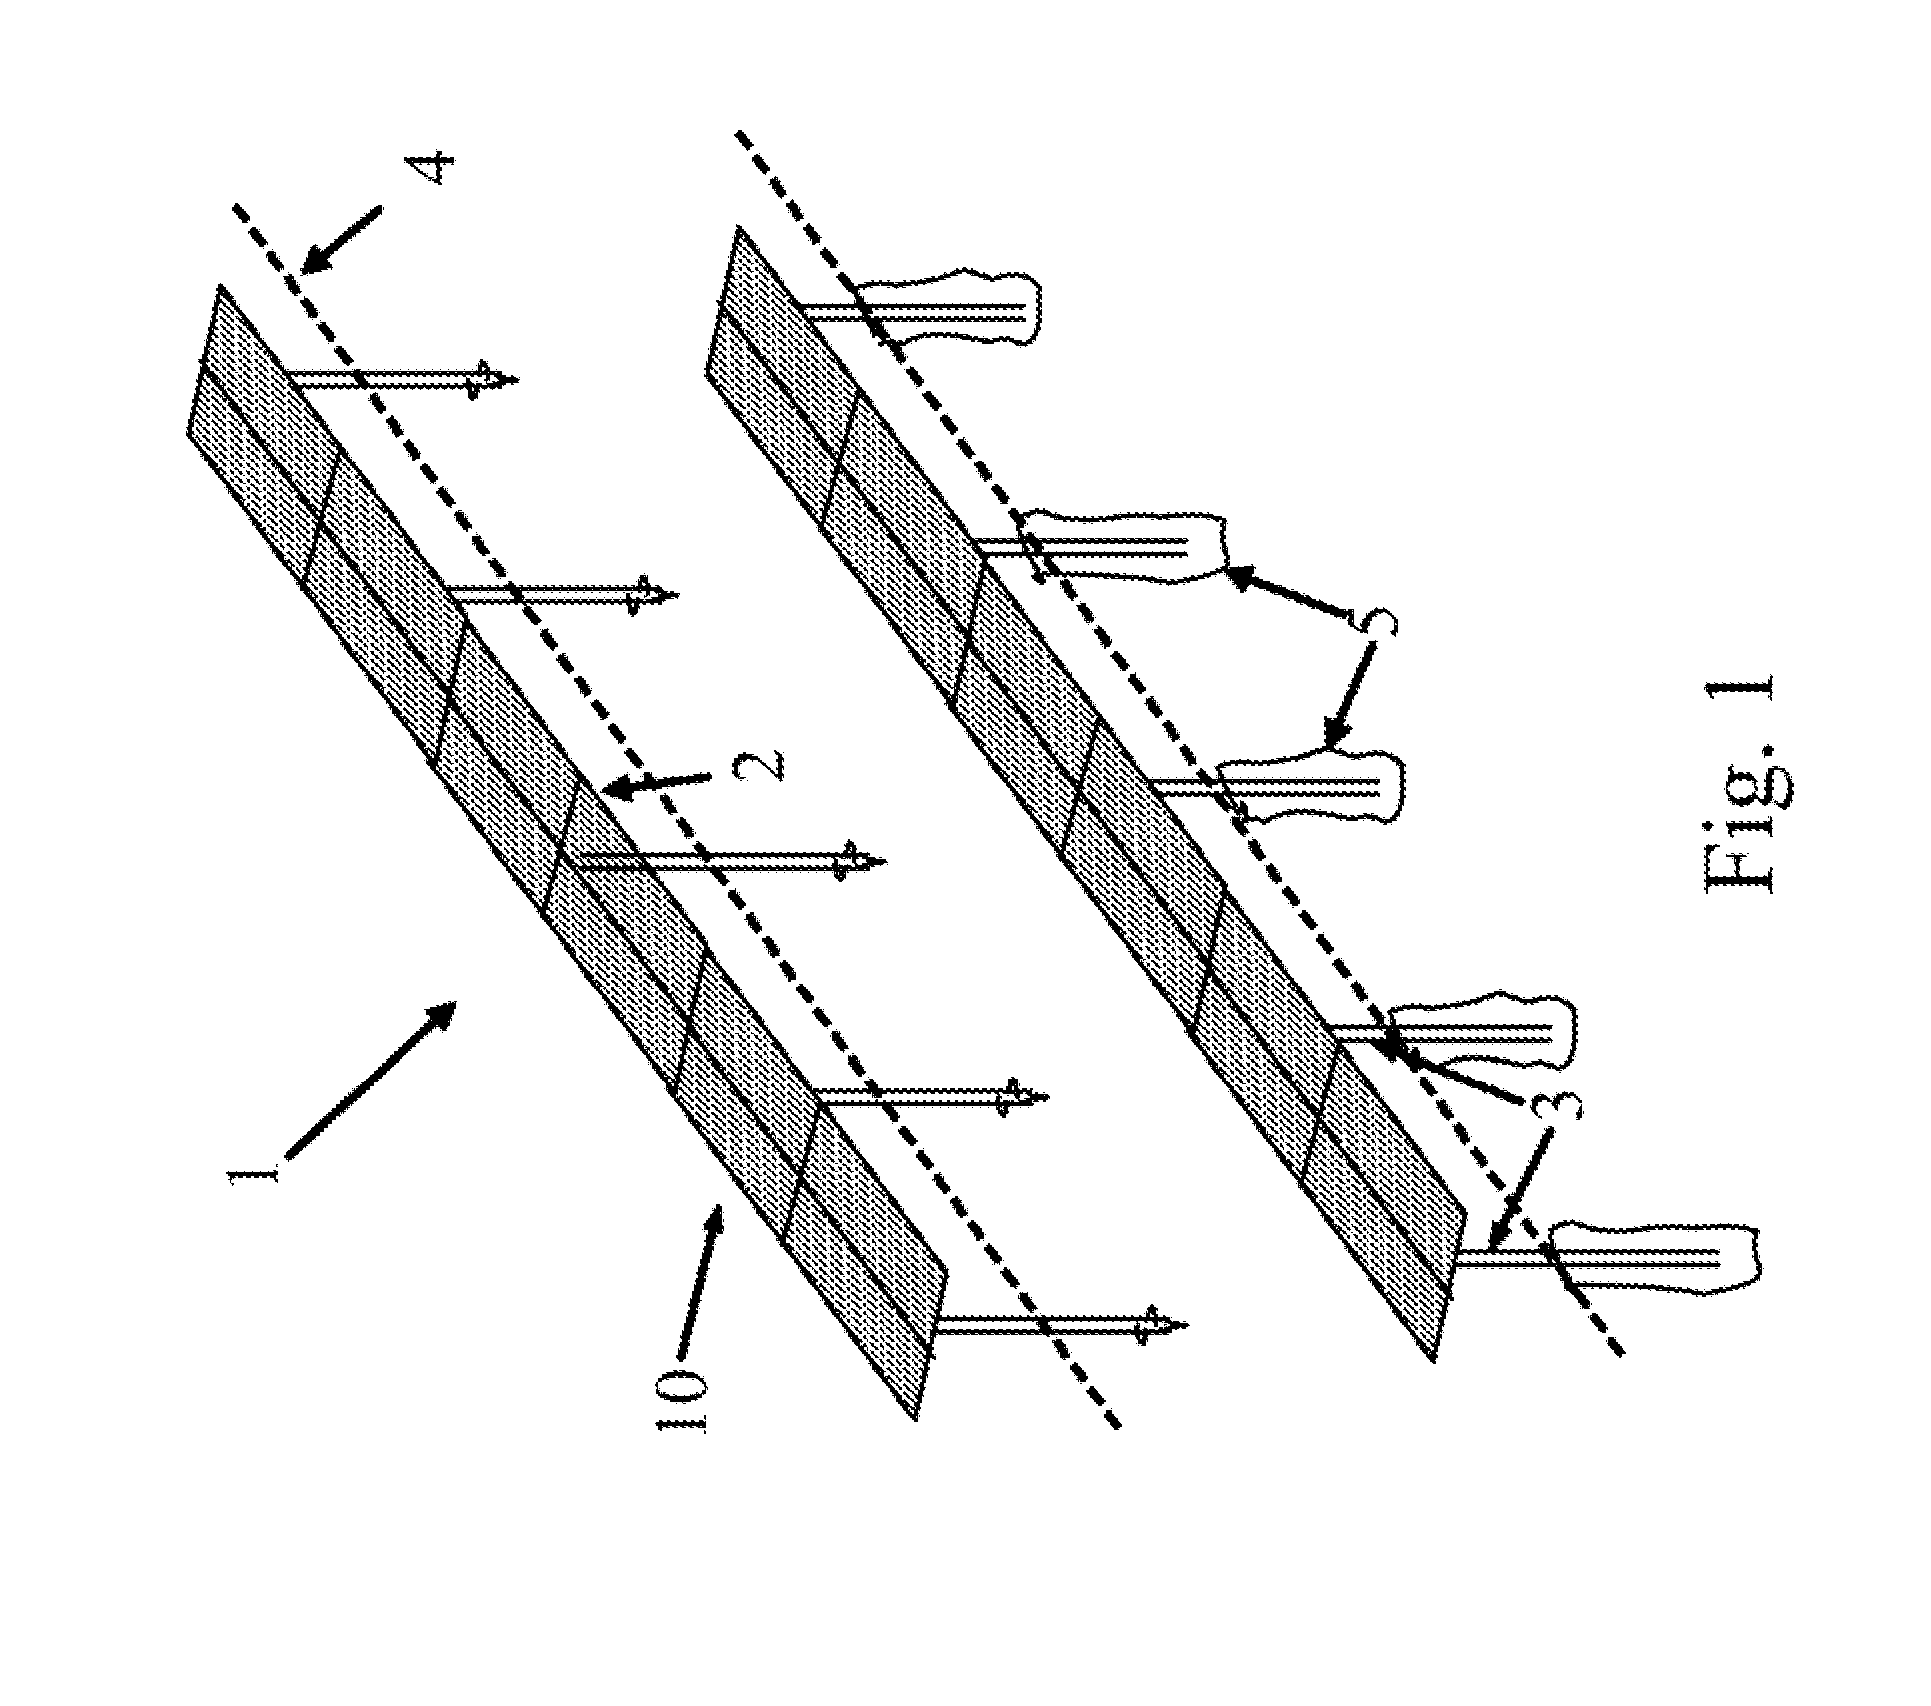 One-Axis Solar Tracker System and Apparatus with Wind Lock Devices